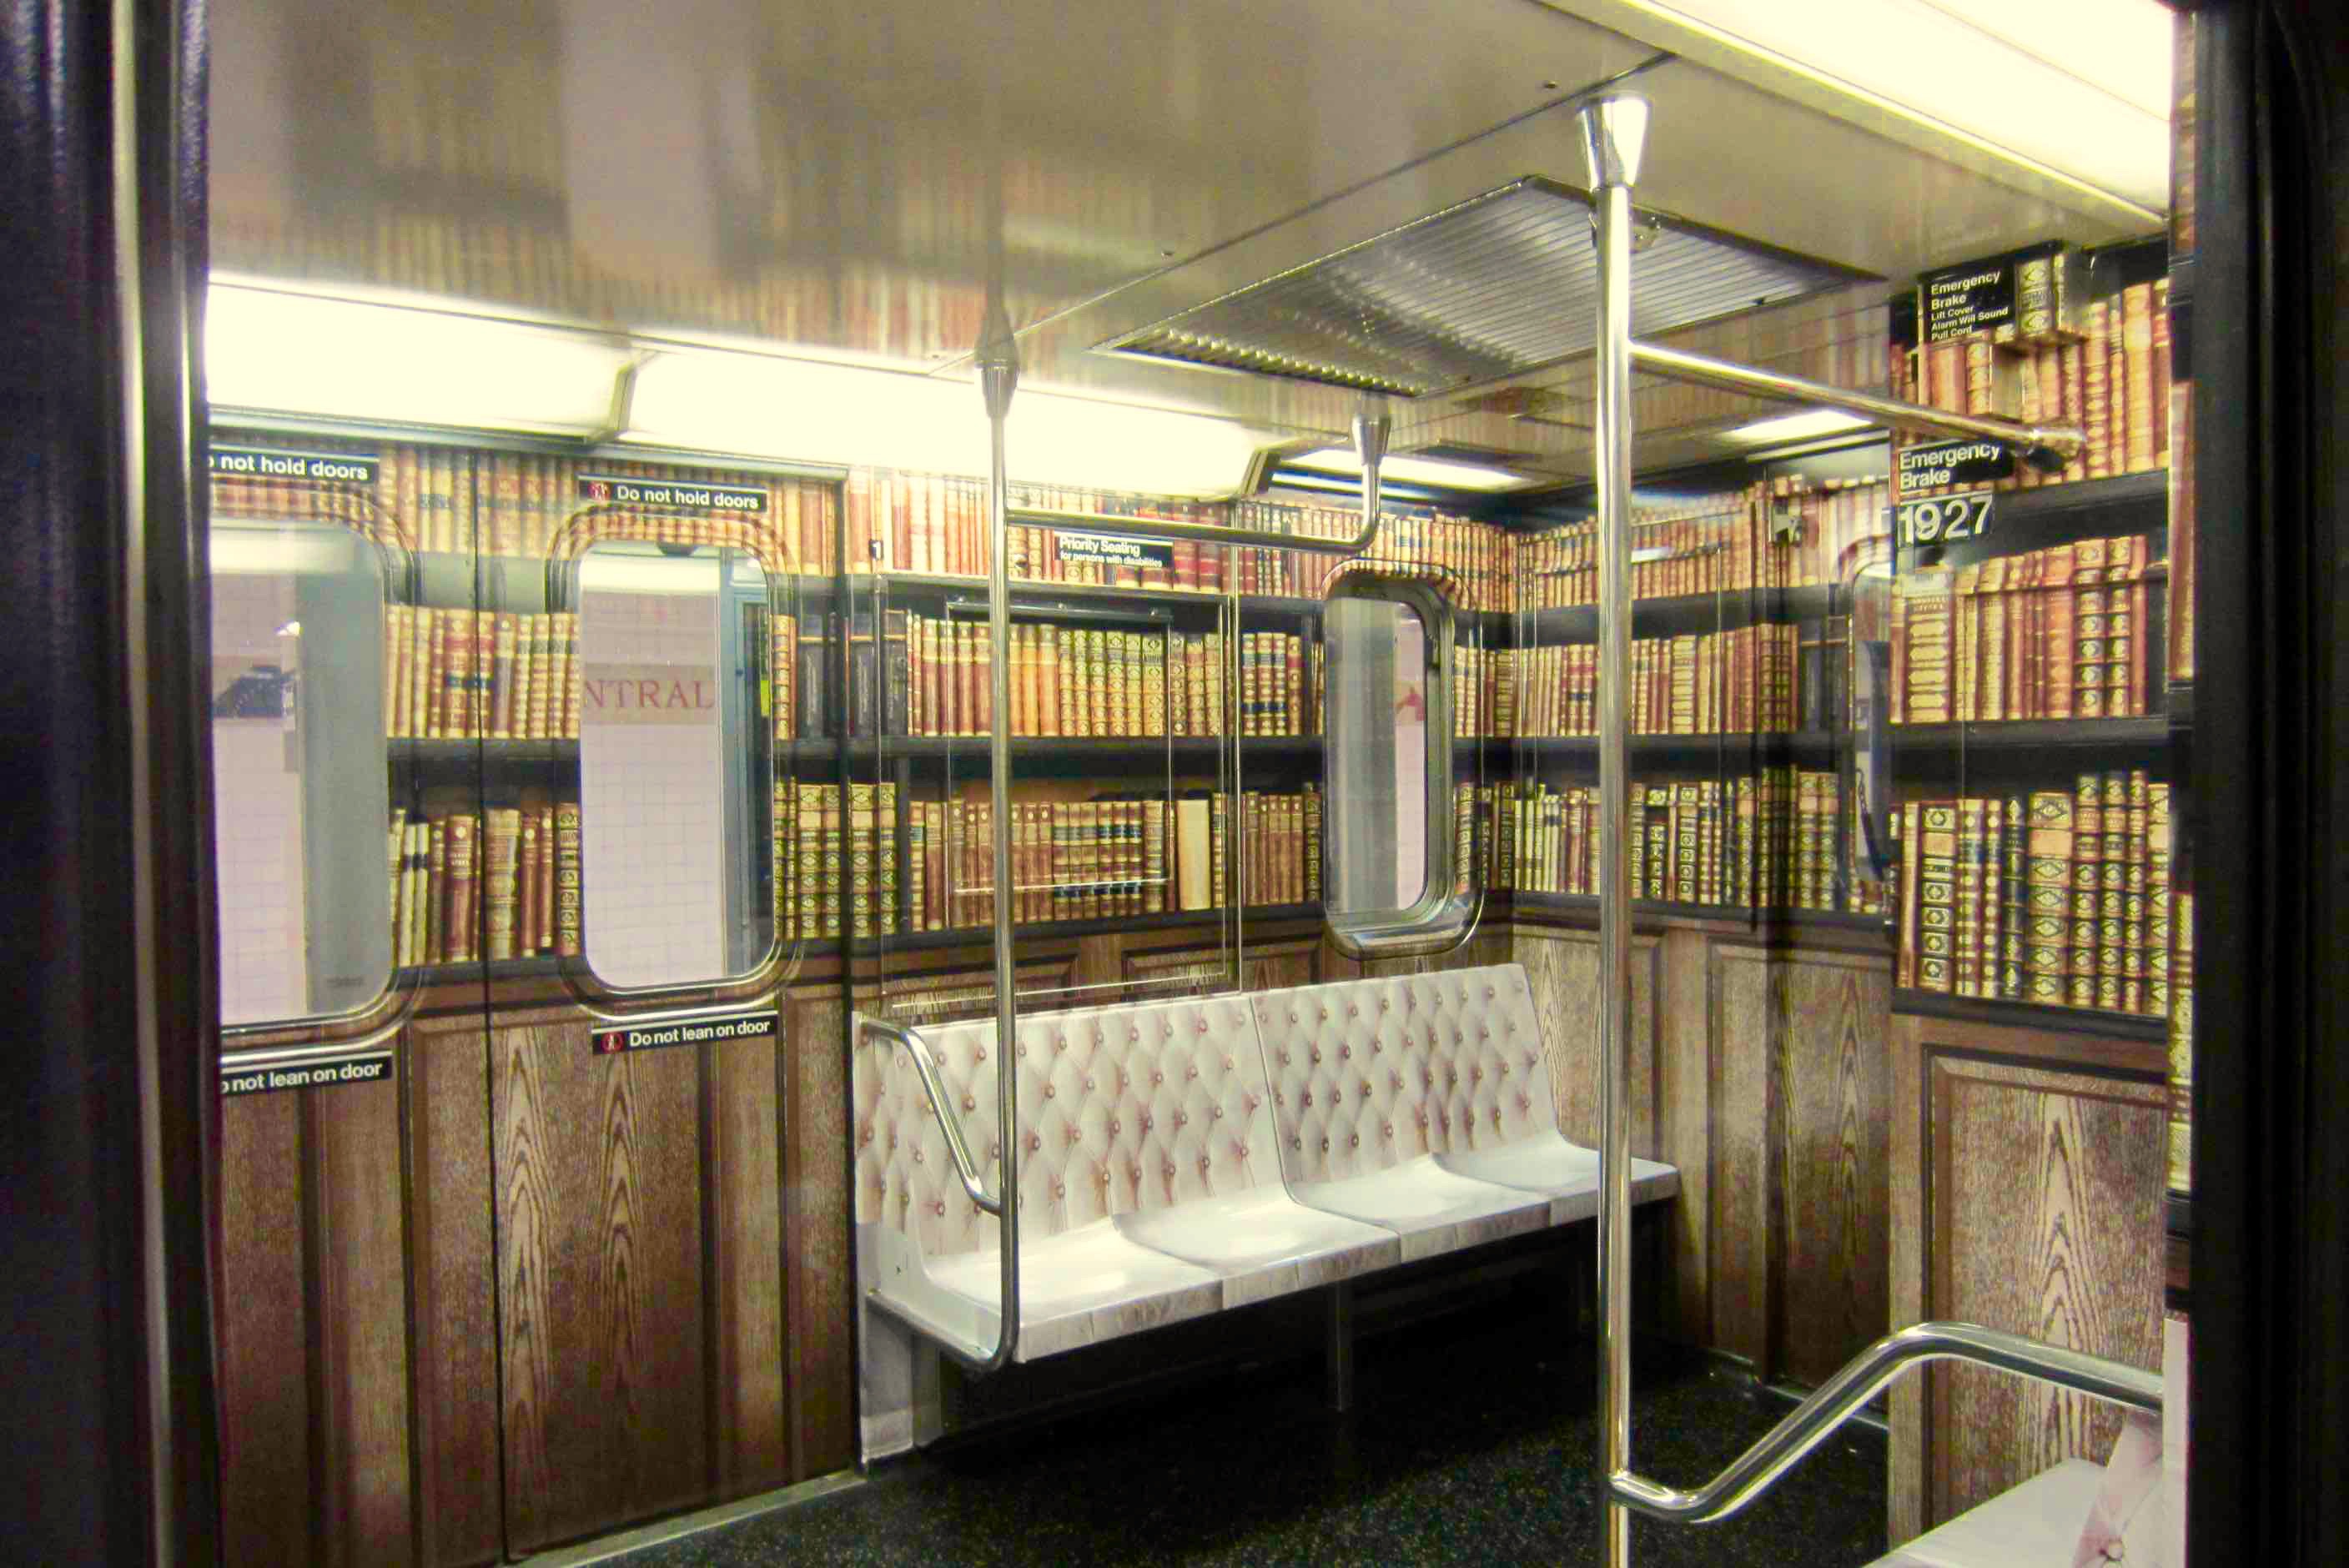 A subway carriage has been decorated to look like a library